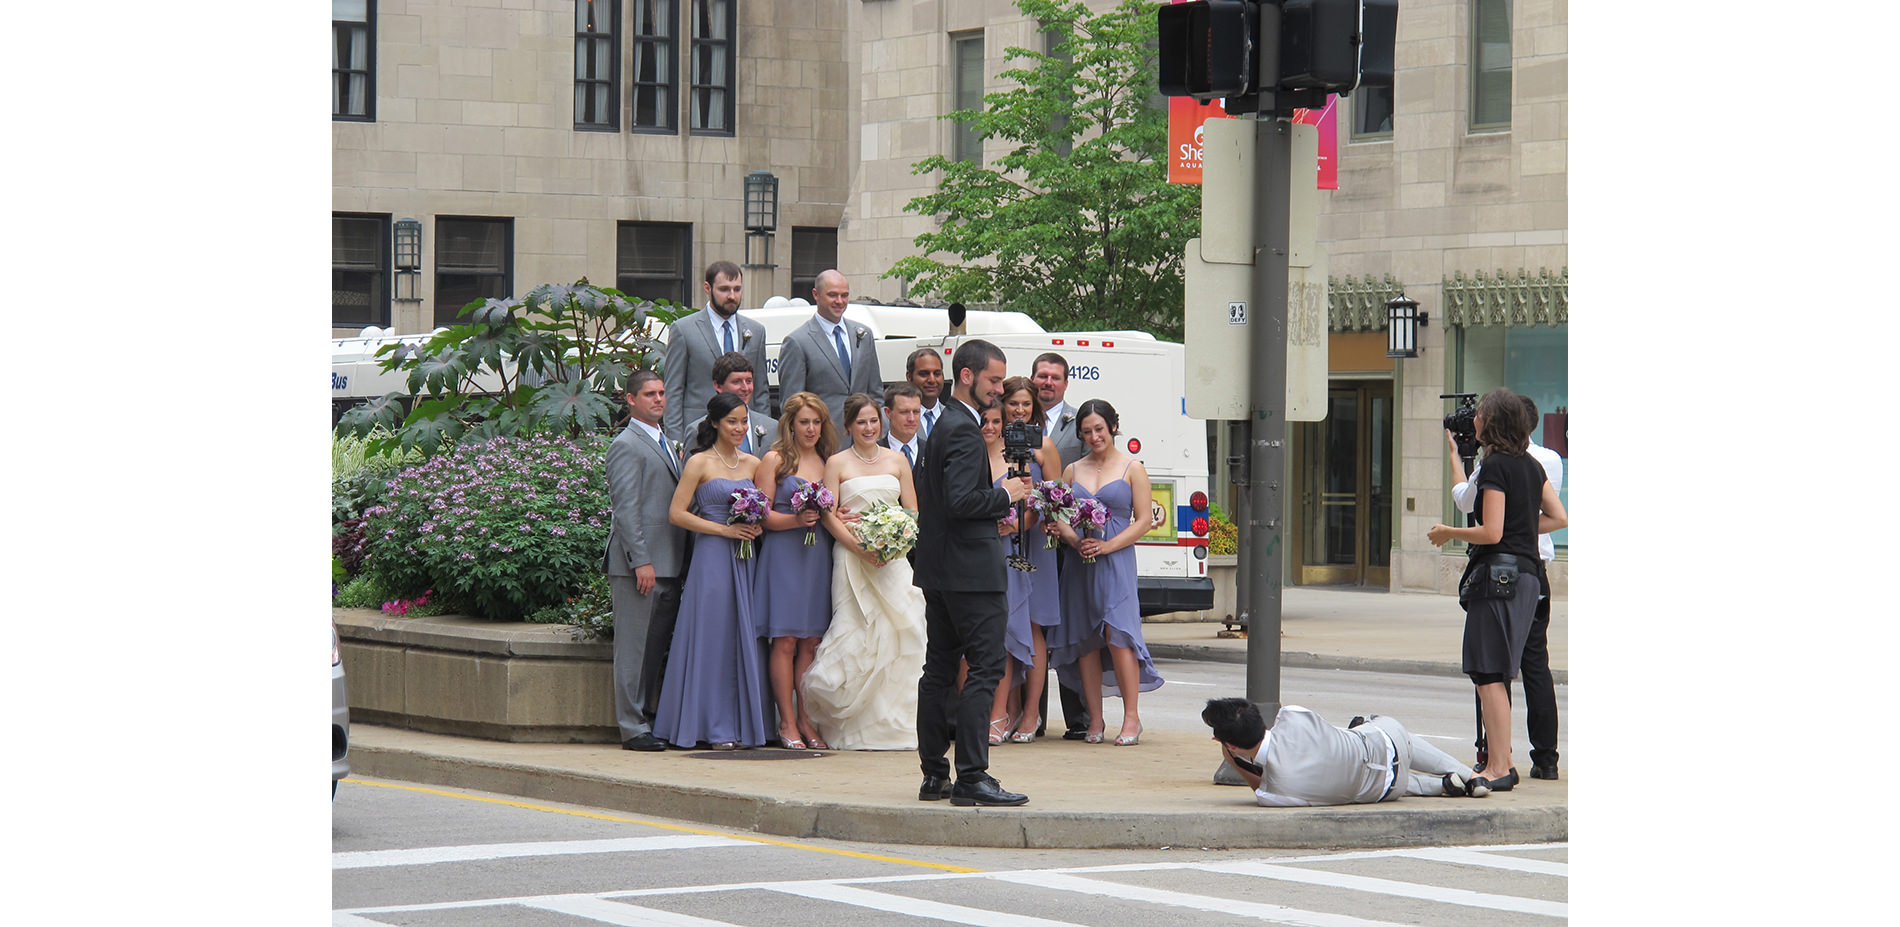 Various People Taking Photos Near Planters on Michigan Avenue